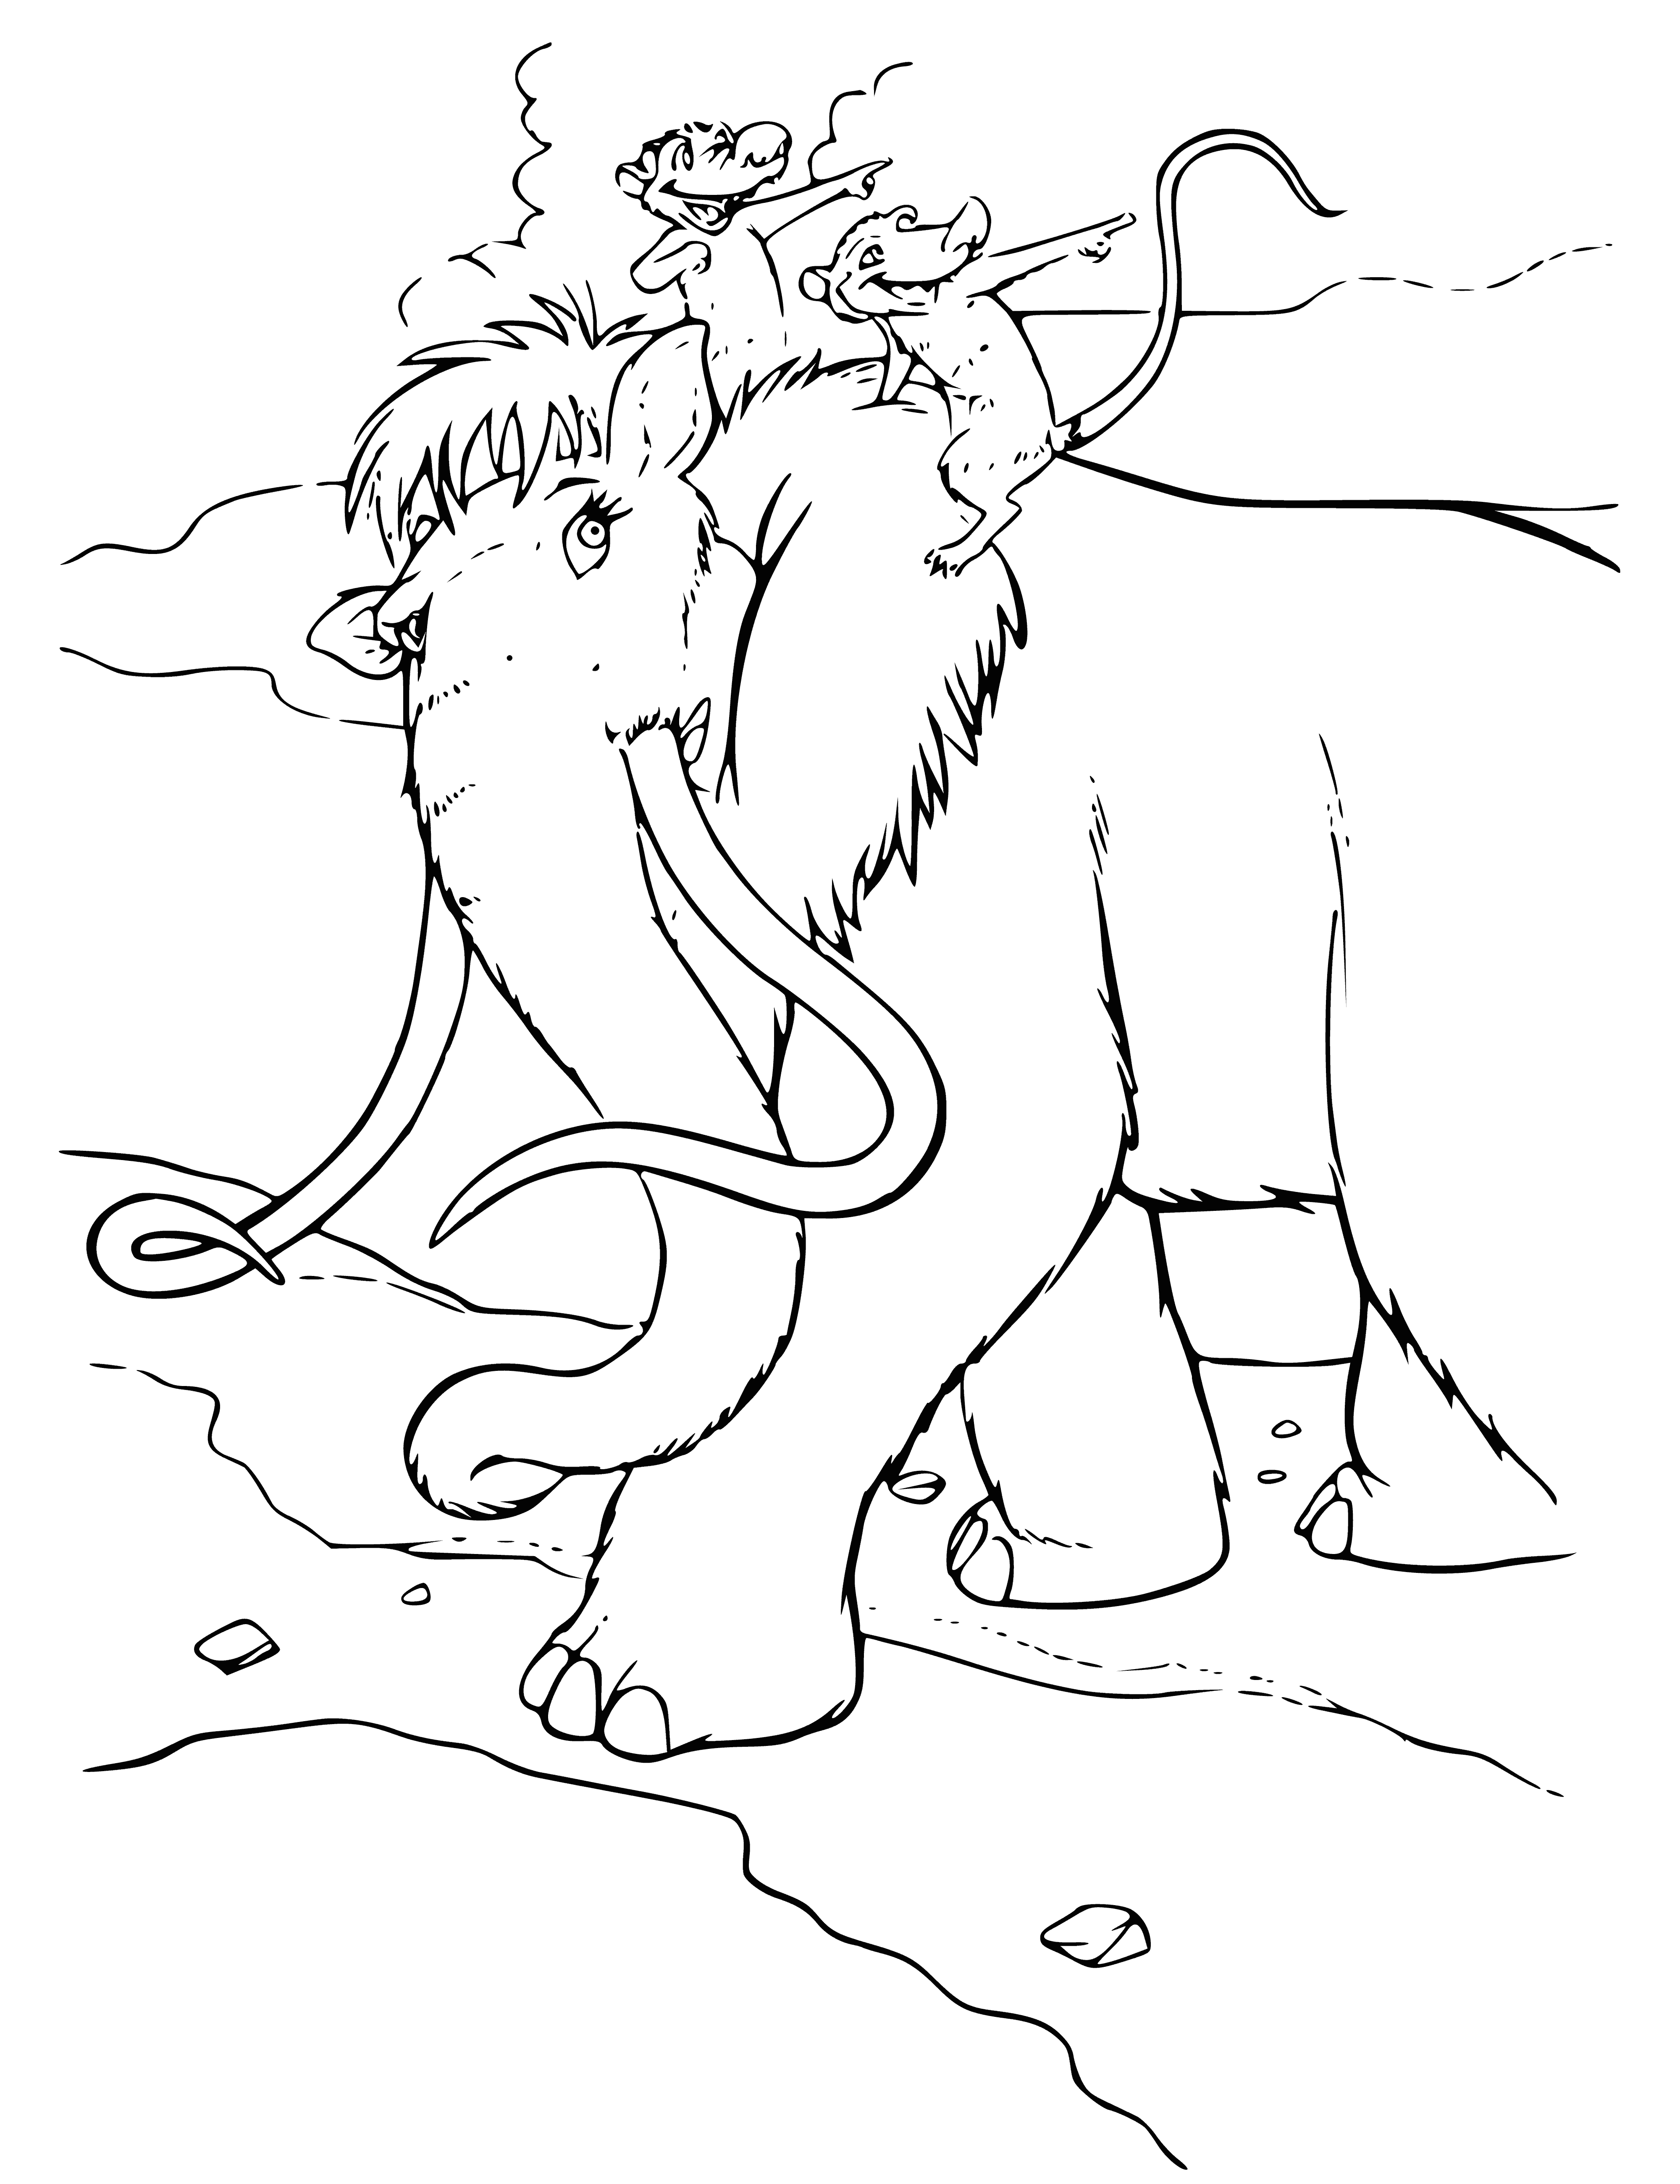 Crash and Eddie on a mammoth coloring page